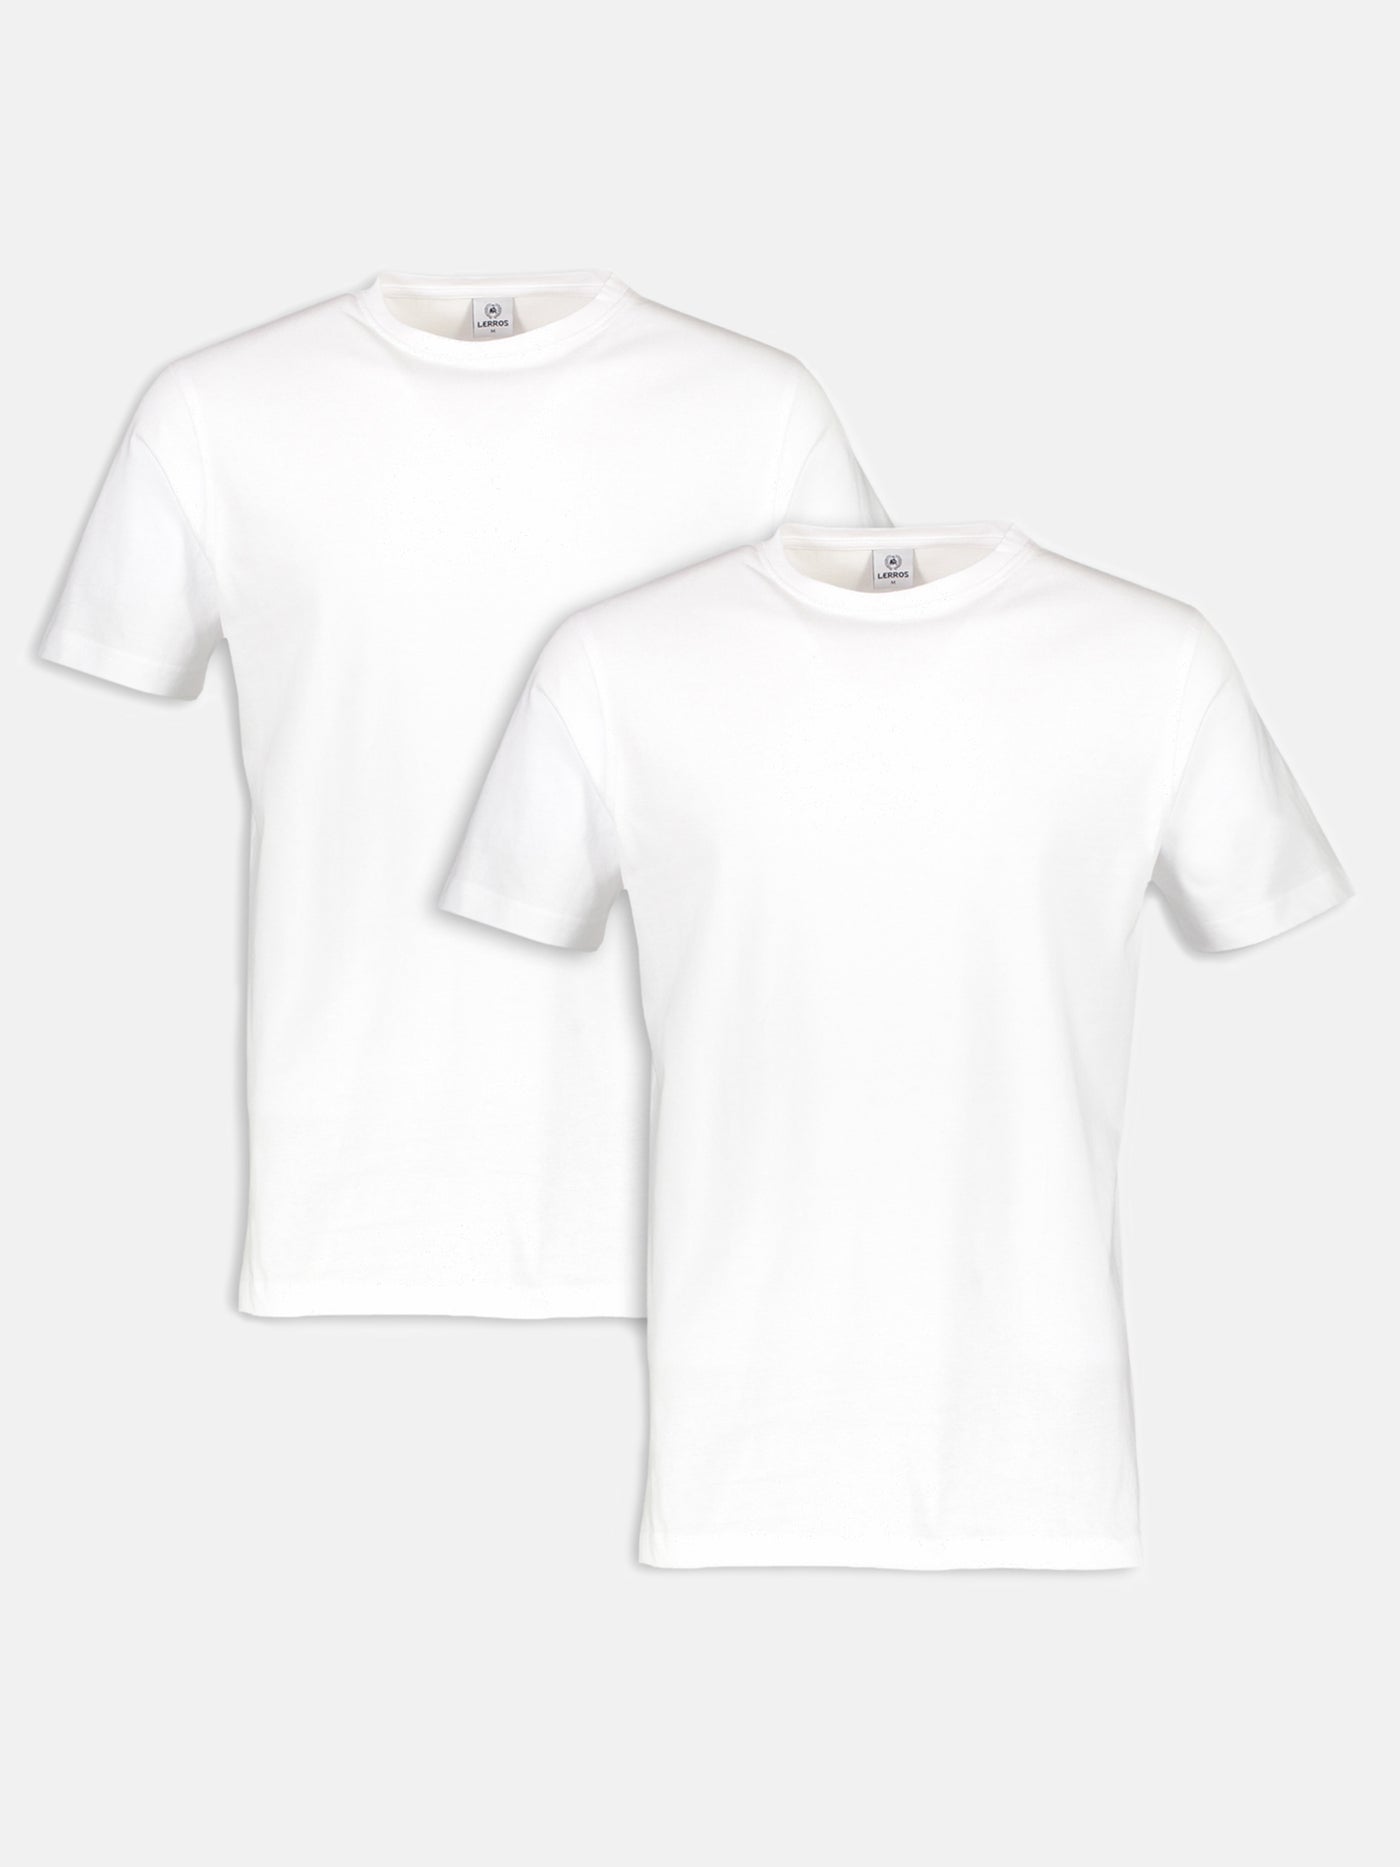 Round neck double pack T-shirt for men in premium cotton quality